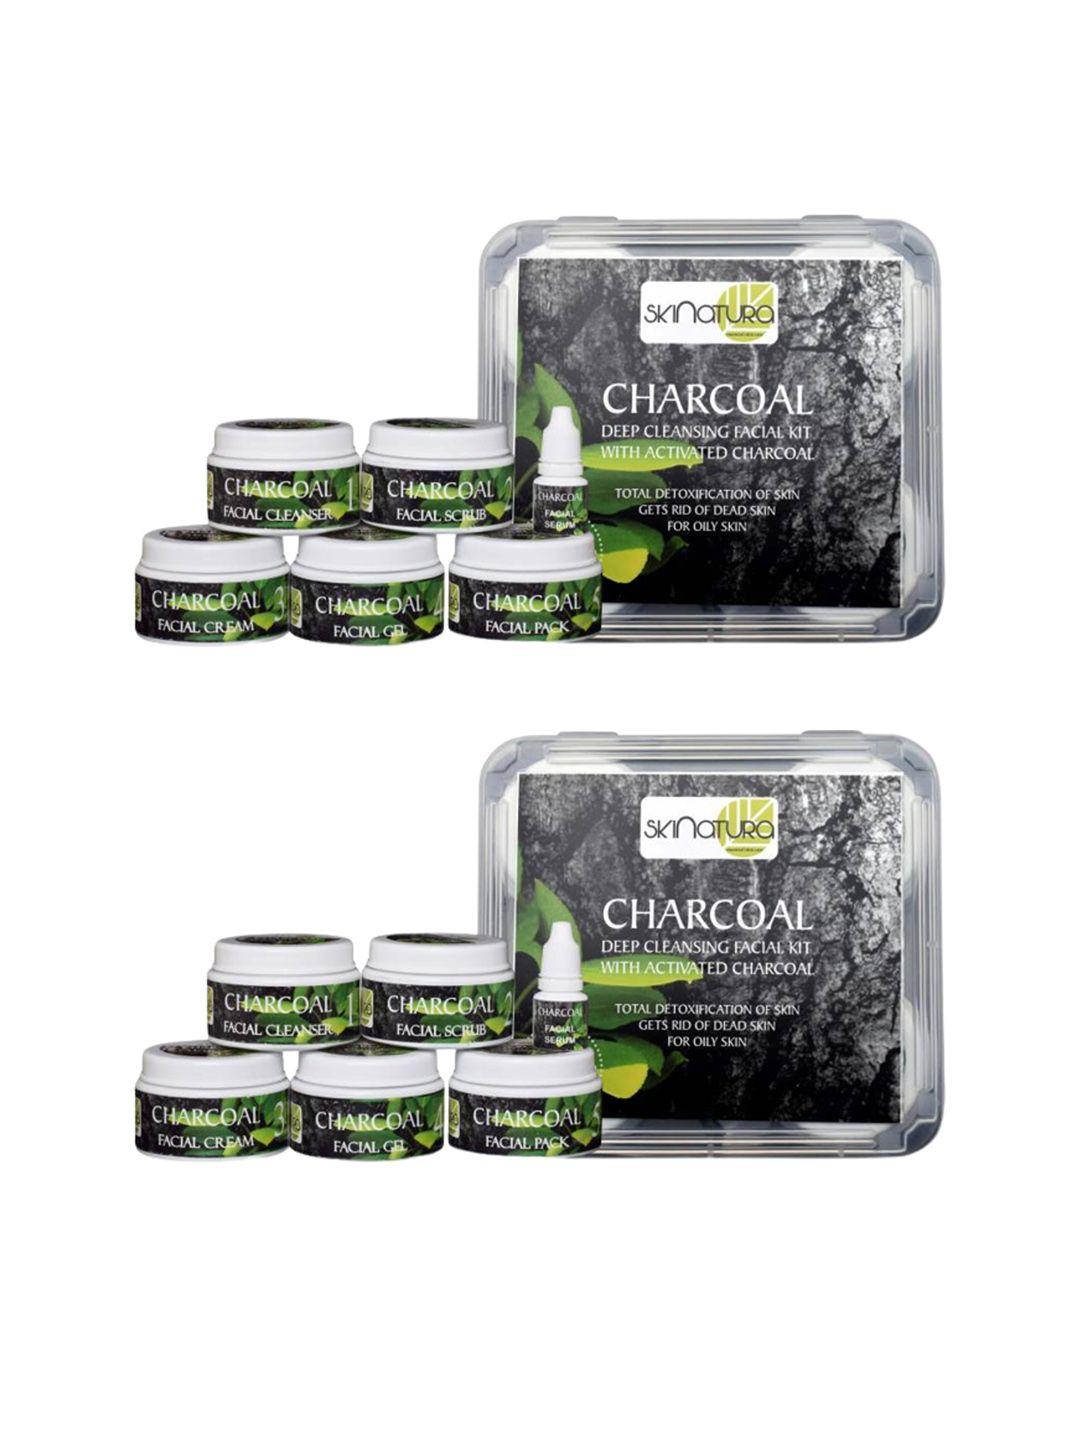 skinatura-adults-set-of-2-charcoal-deep-cleansing-professional-facial-kit-620gm